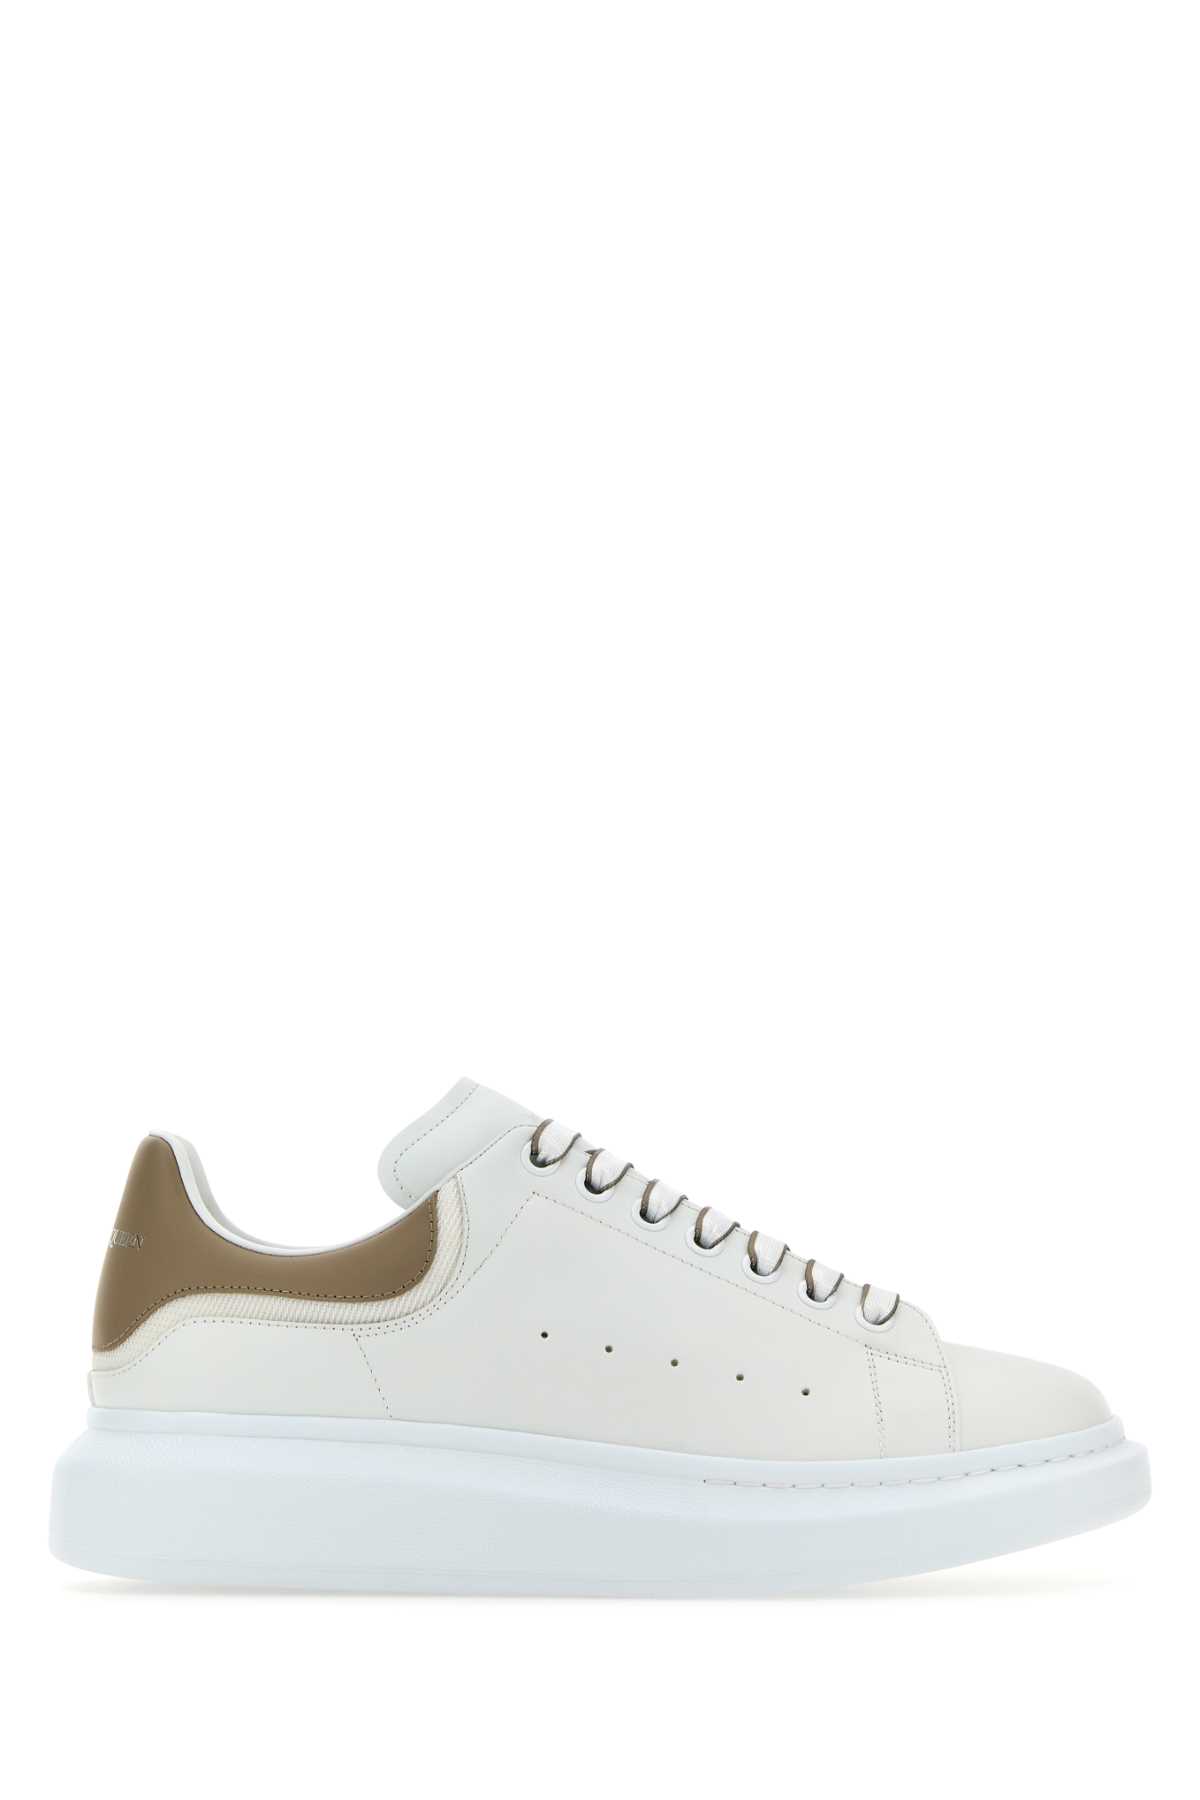 Shop Alexander Mcqueen White Leather Sneakers With Dove Grey Leather Heel In Whitestone